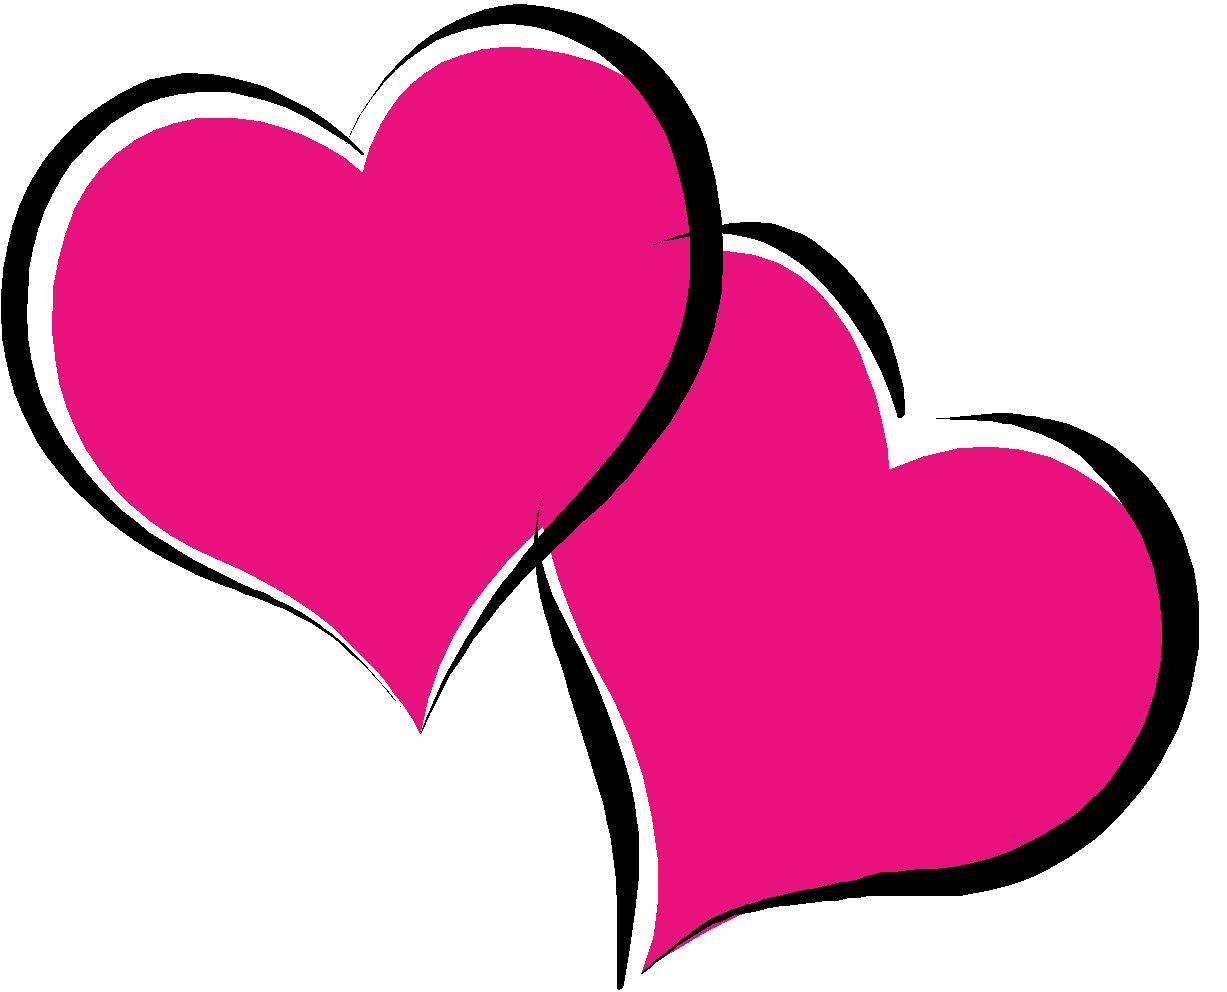 Heart Clip Art Microsoft - Free Clipart Images